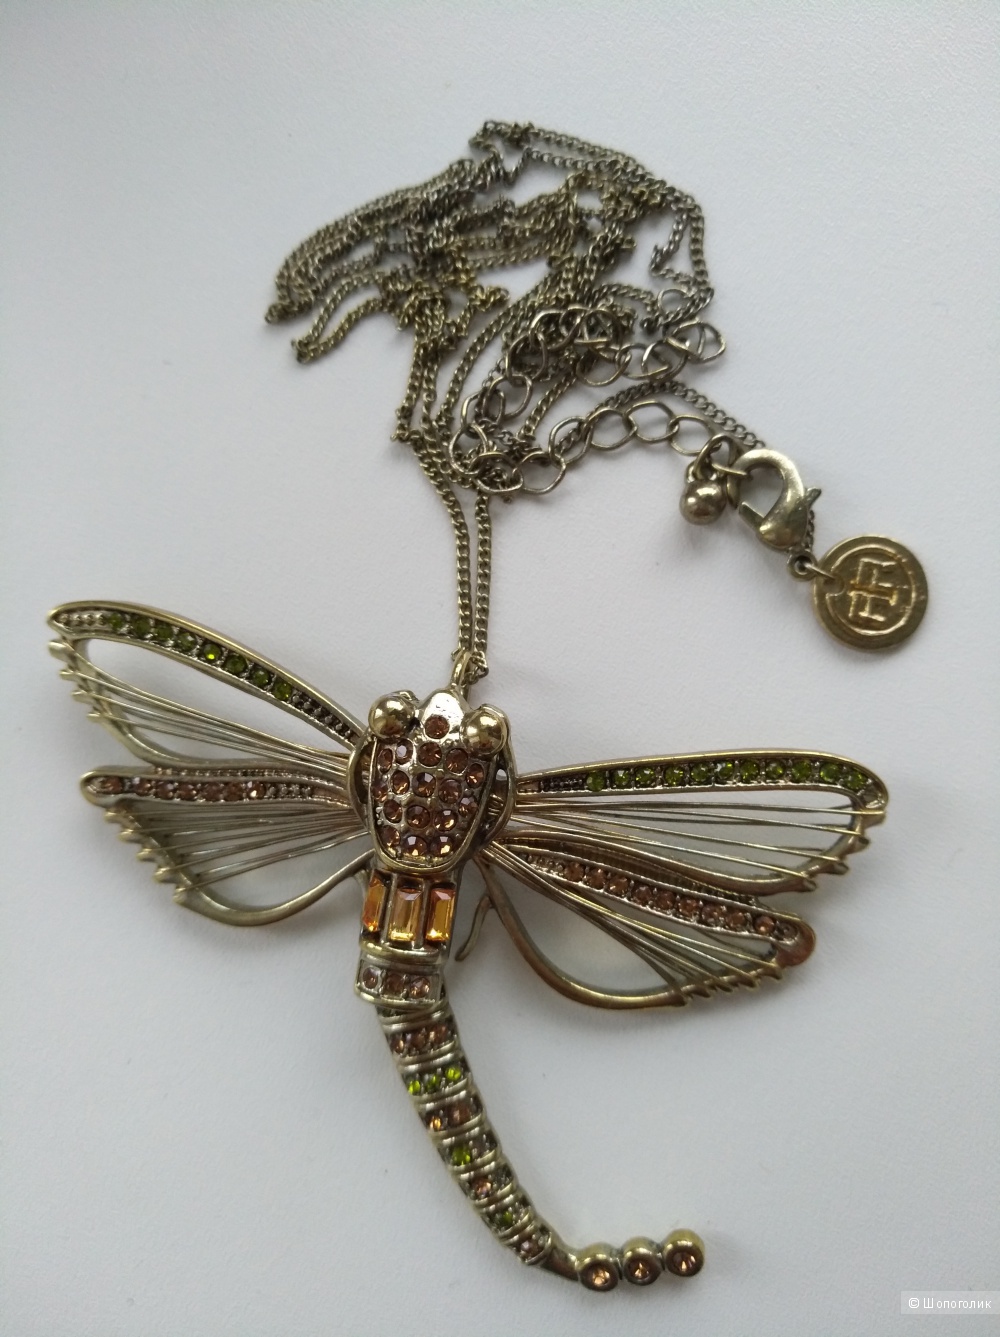 River Island Dragonfly Necklace